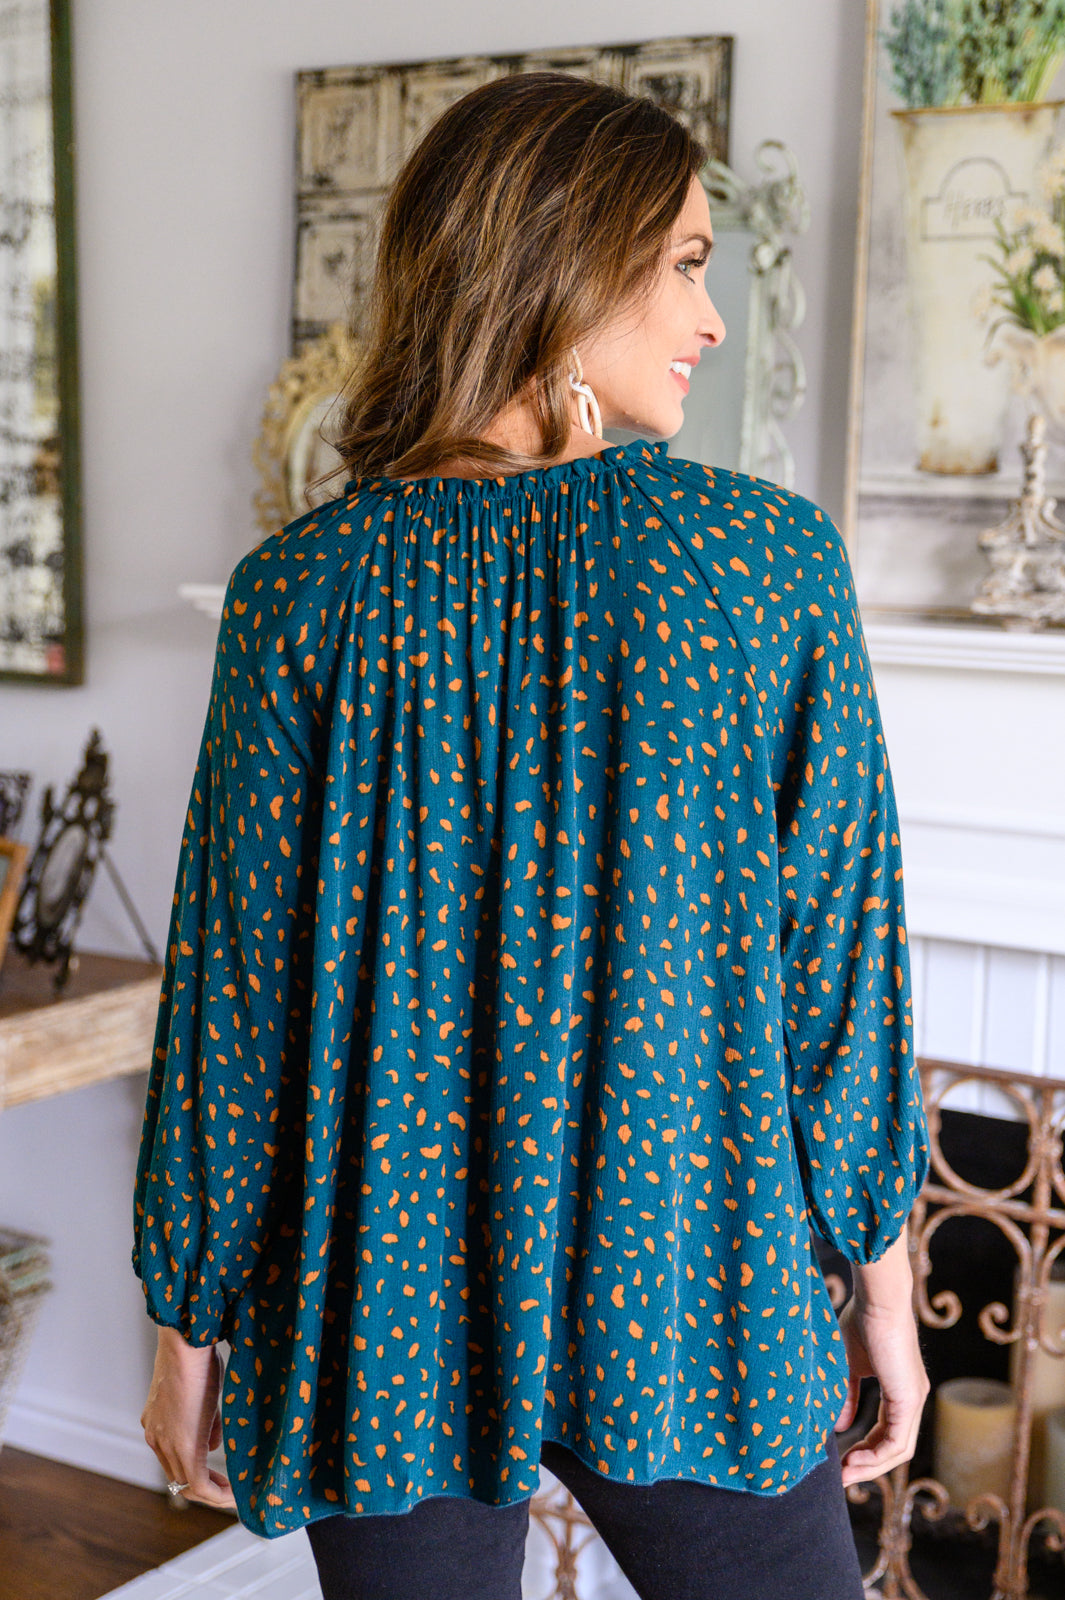 The Time Is Now Spotted Blouse In Teal - 11/17/2022